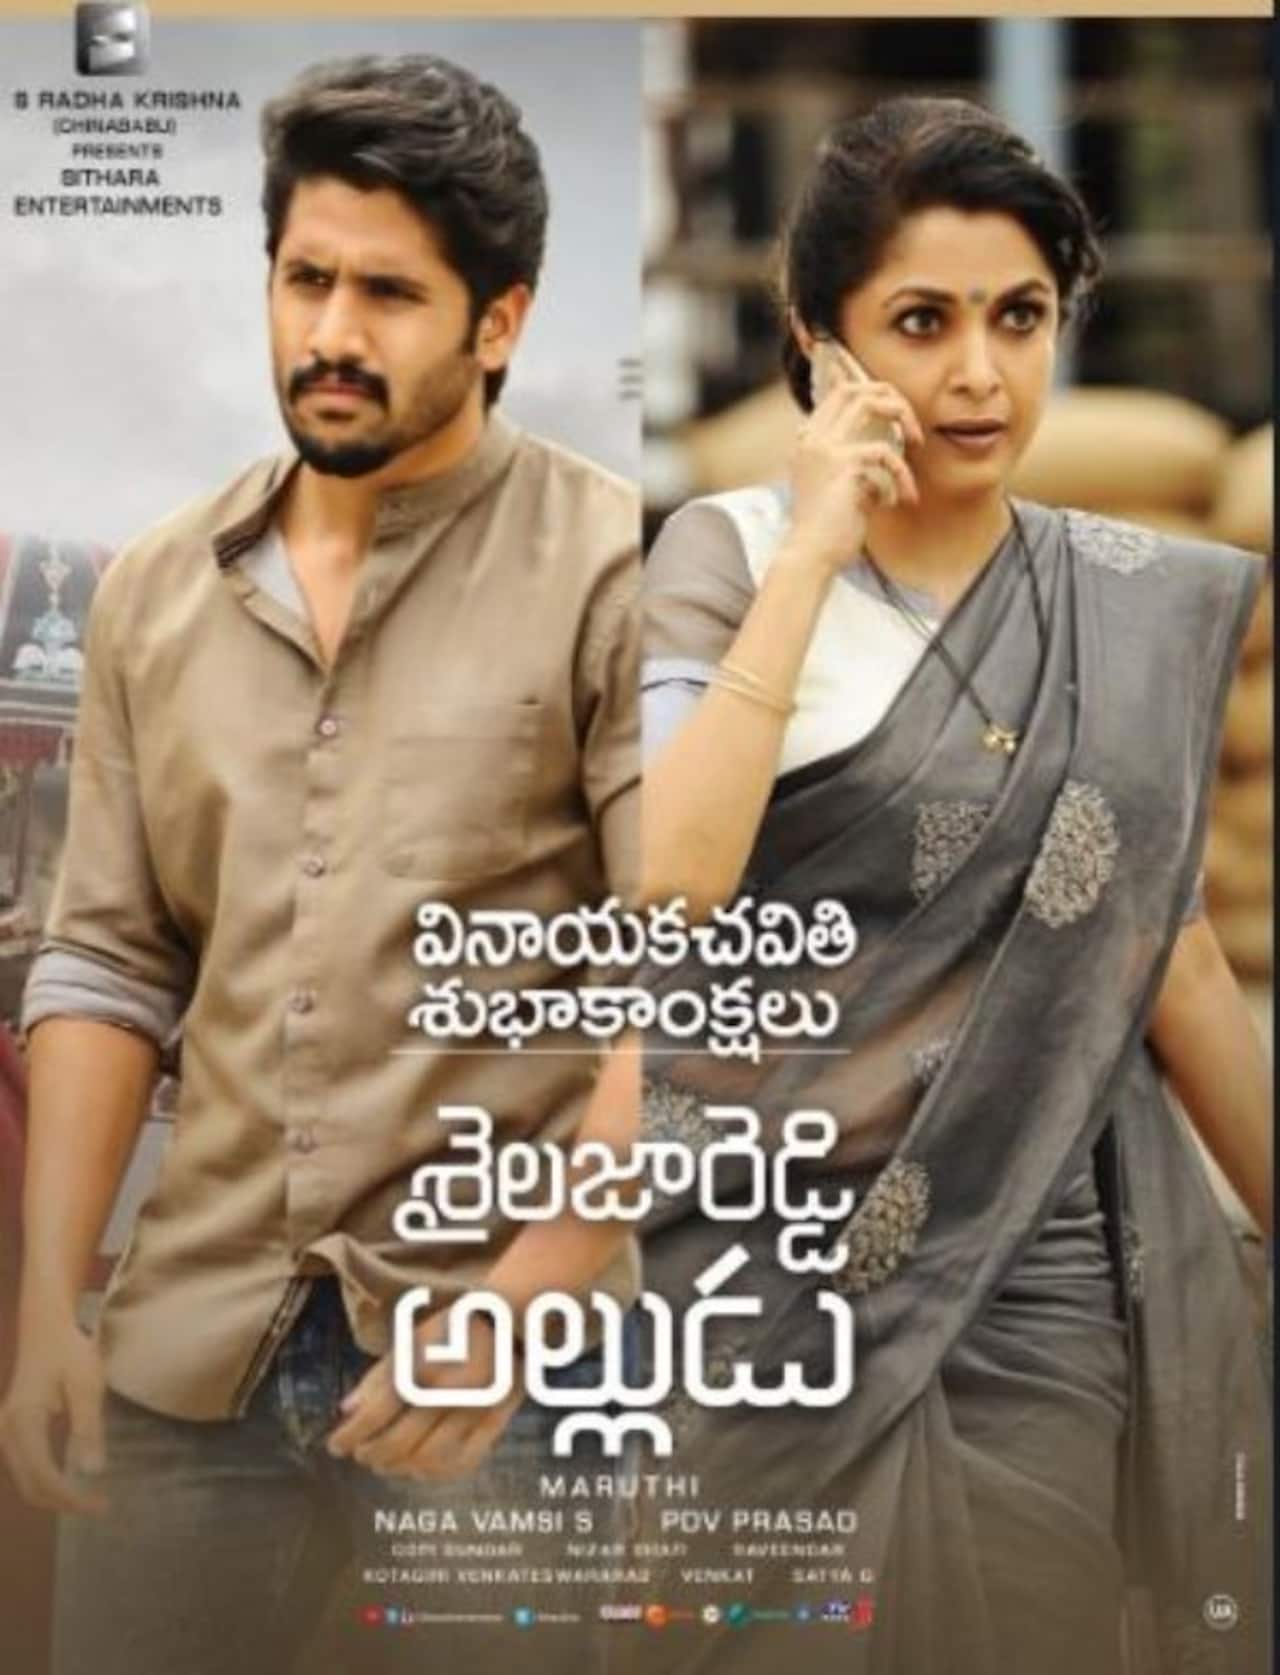 Shailaja Reddy Alludu Twitter review: Fans have mixed views about Naga Chaitanya and Anu Emmanuel's film